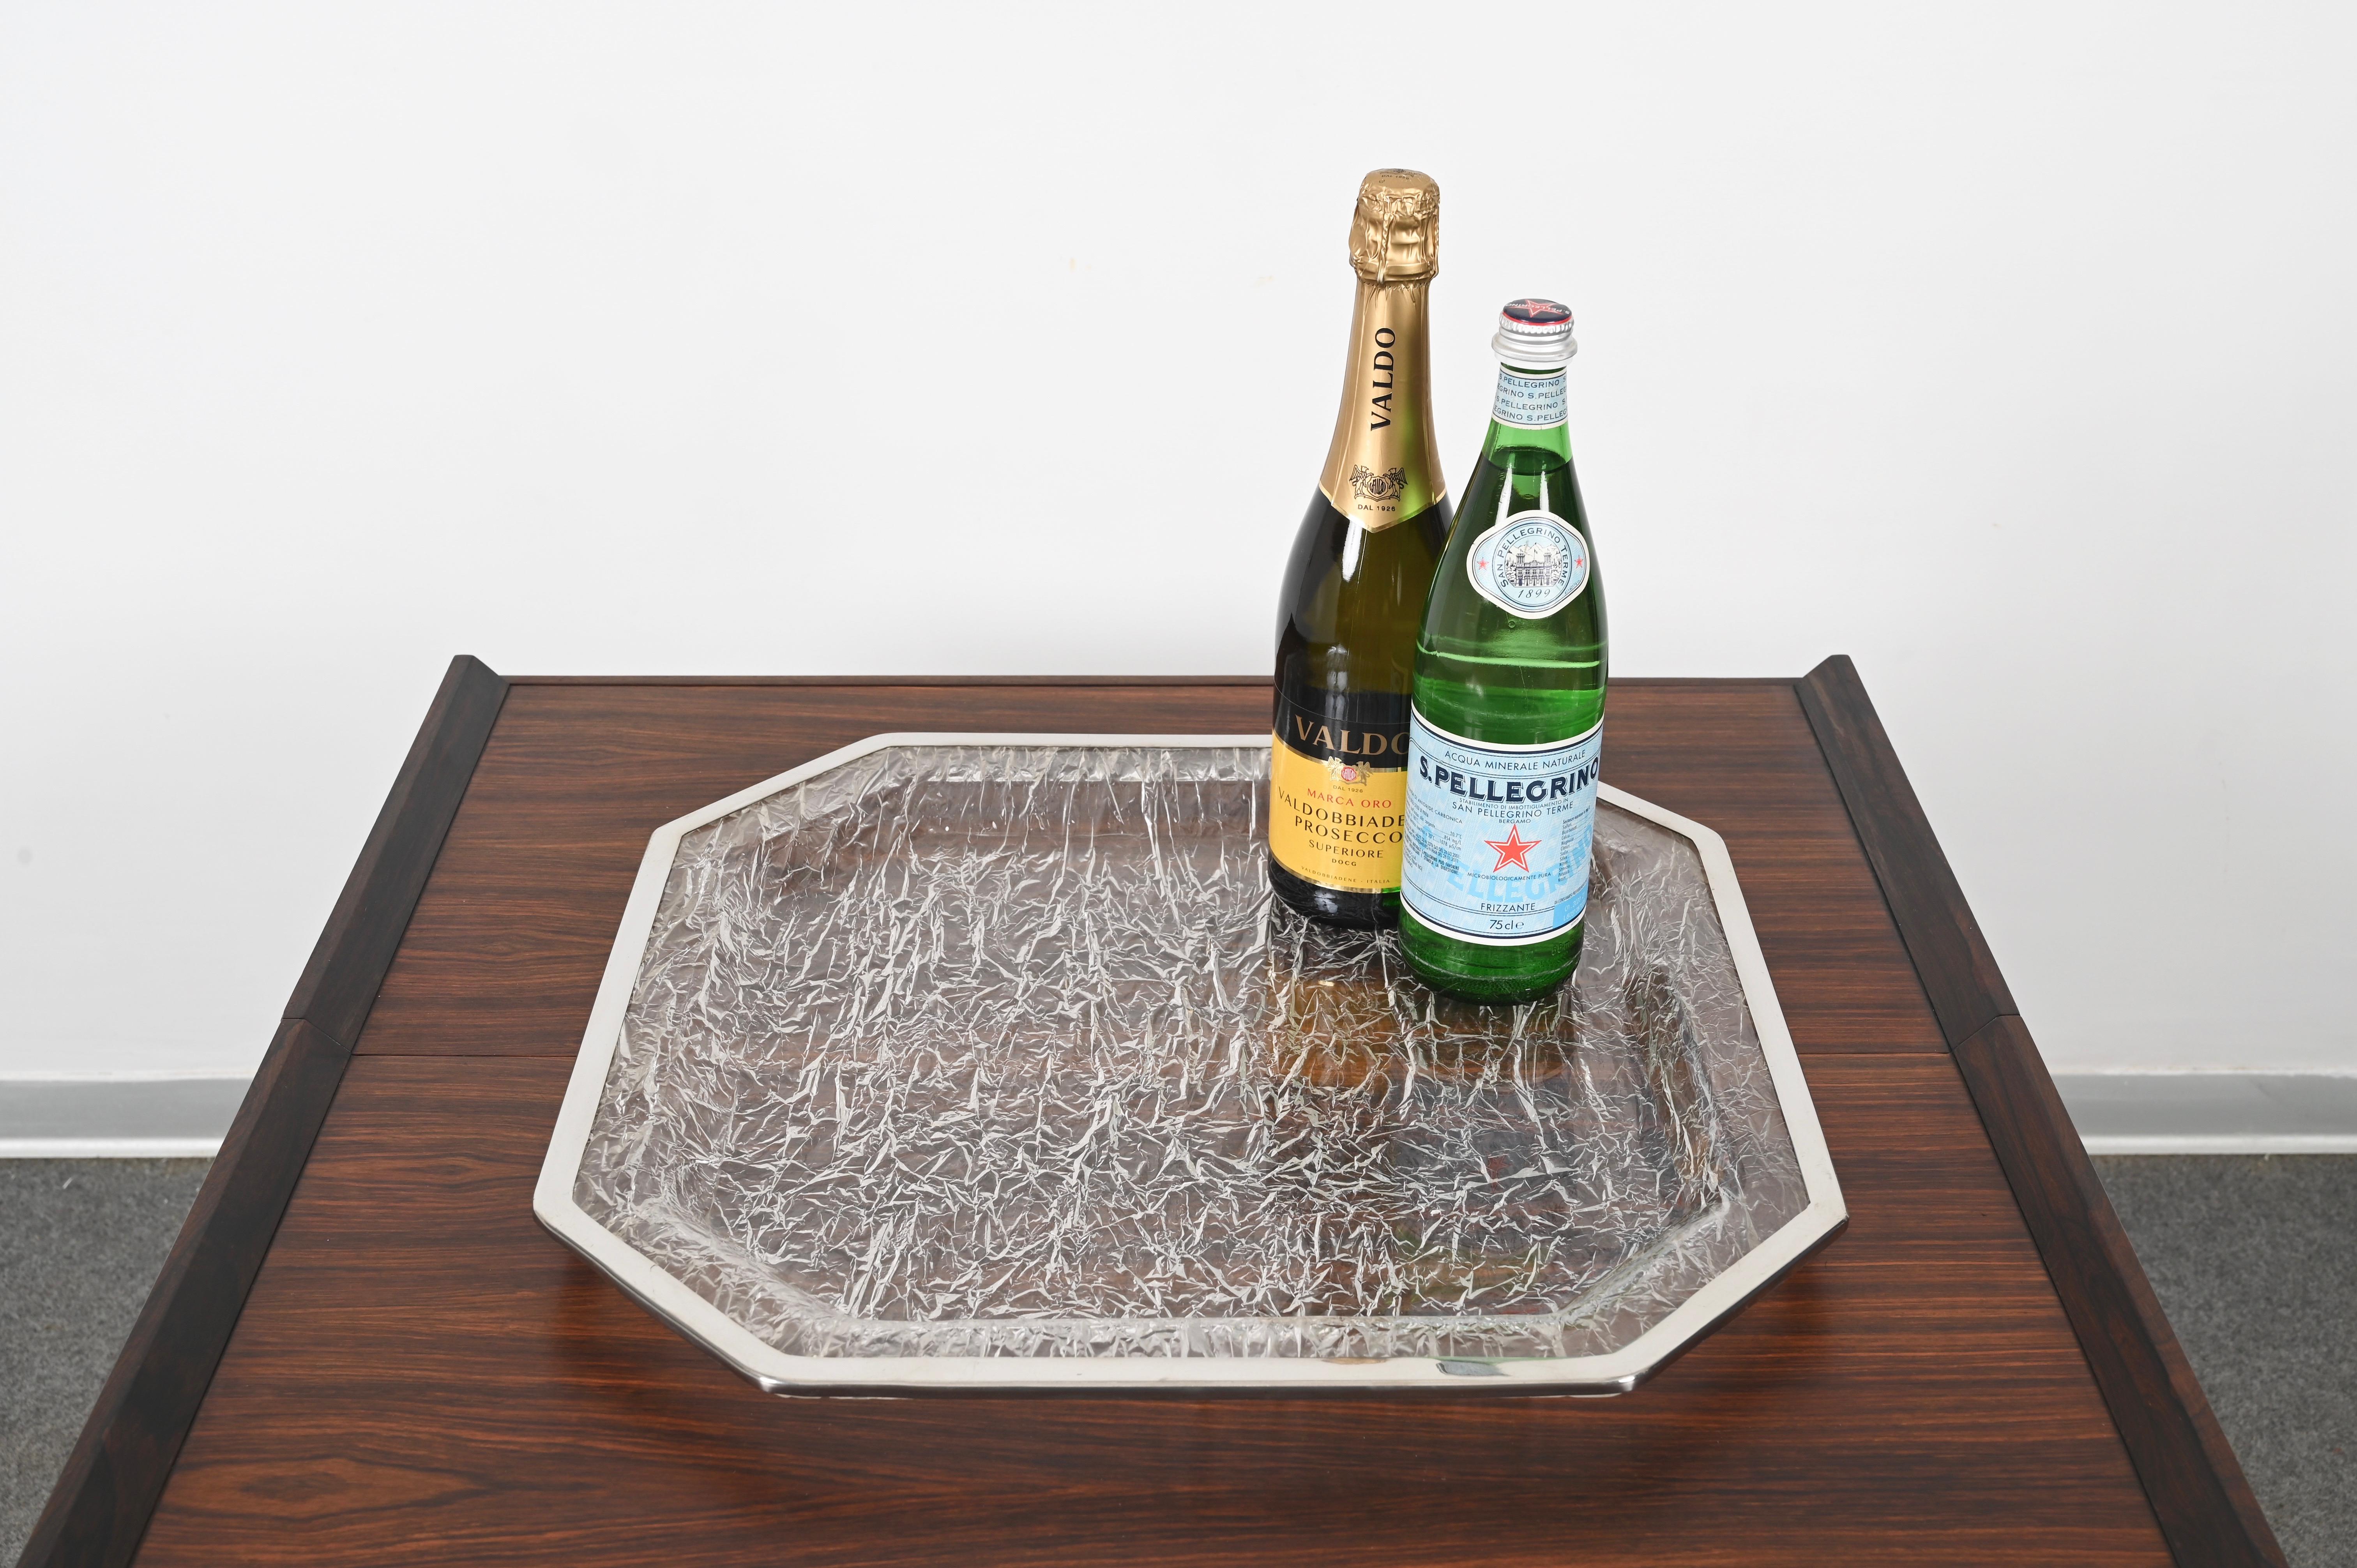 Stunning midcentury decorative tray in ice-effect clear lucite and chrome. This elegant tray was made in Italy during the 1970s and it is attributed to Willy Rizzo.

This centrepiece is unique as the crystal lucite reproduce an astonishing ice